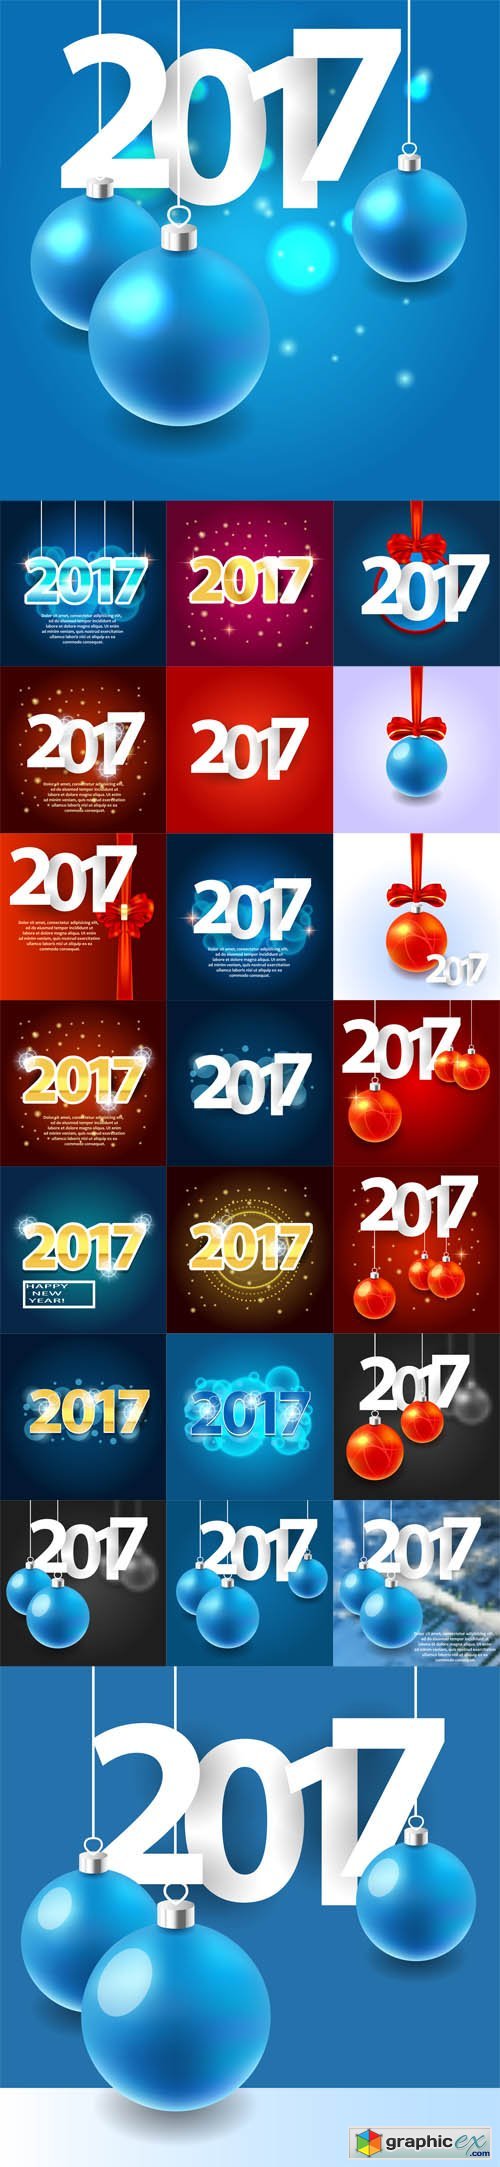 Happy New Year 2017 background. Calendar Template